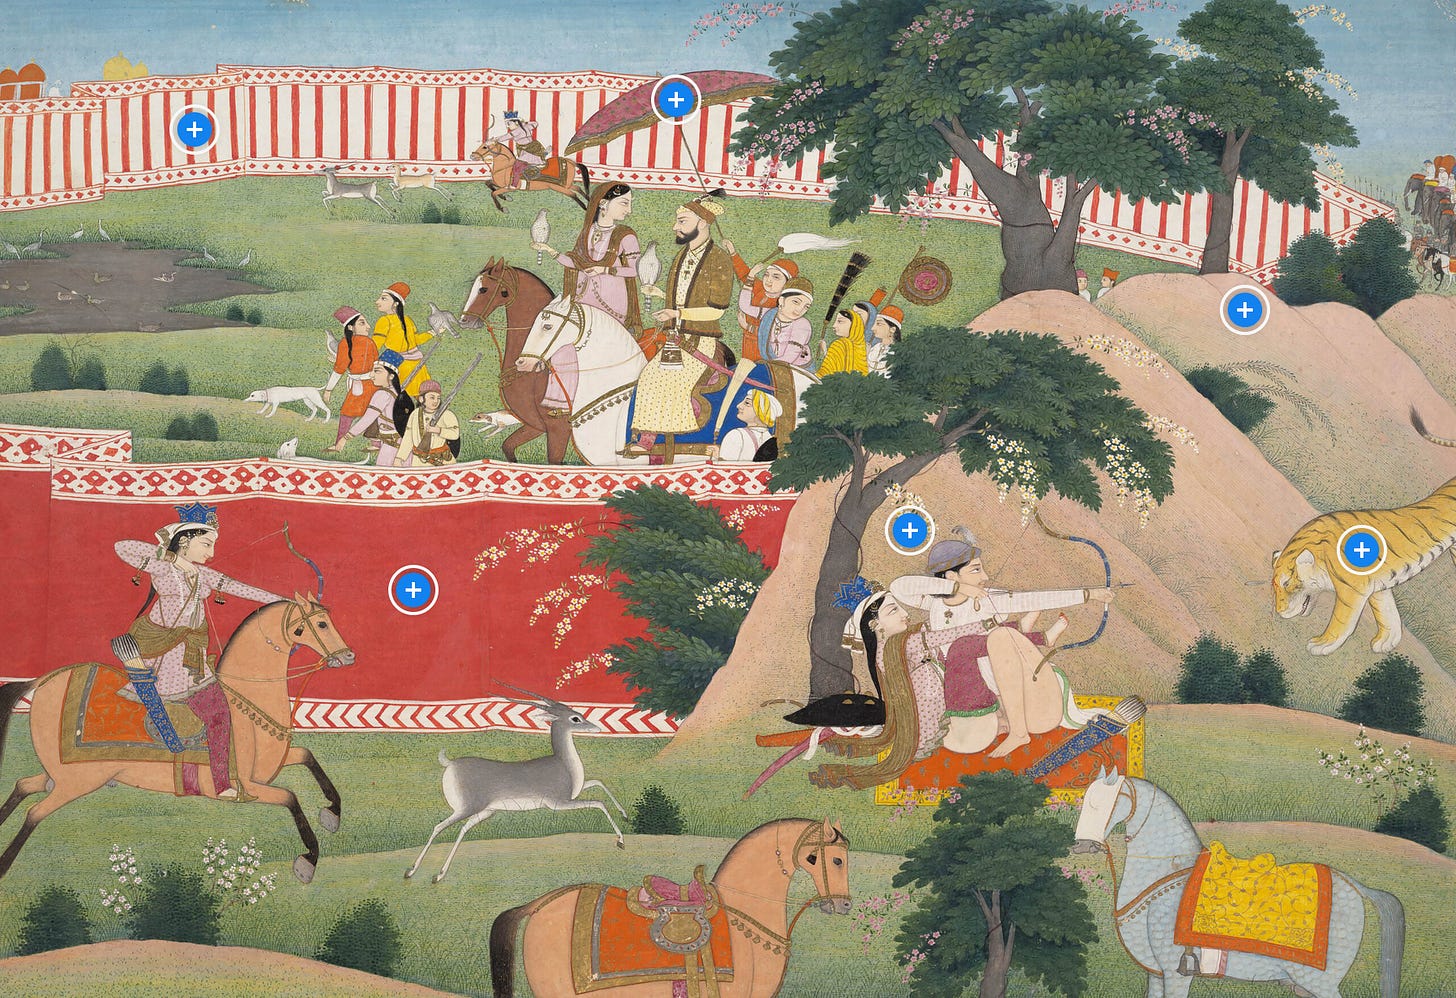 Artwork of people hunting animals by sitting or on horseback. There are tigers, deer, and dogs in the landscape.